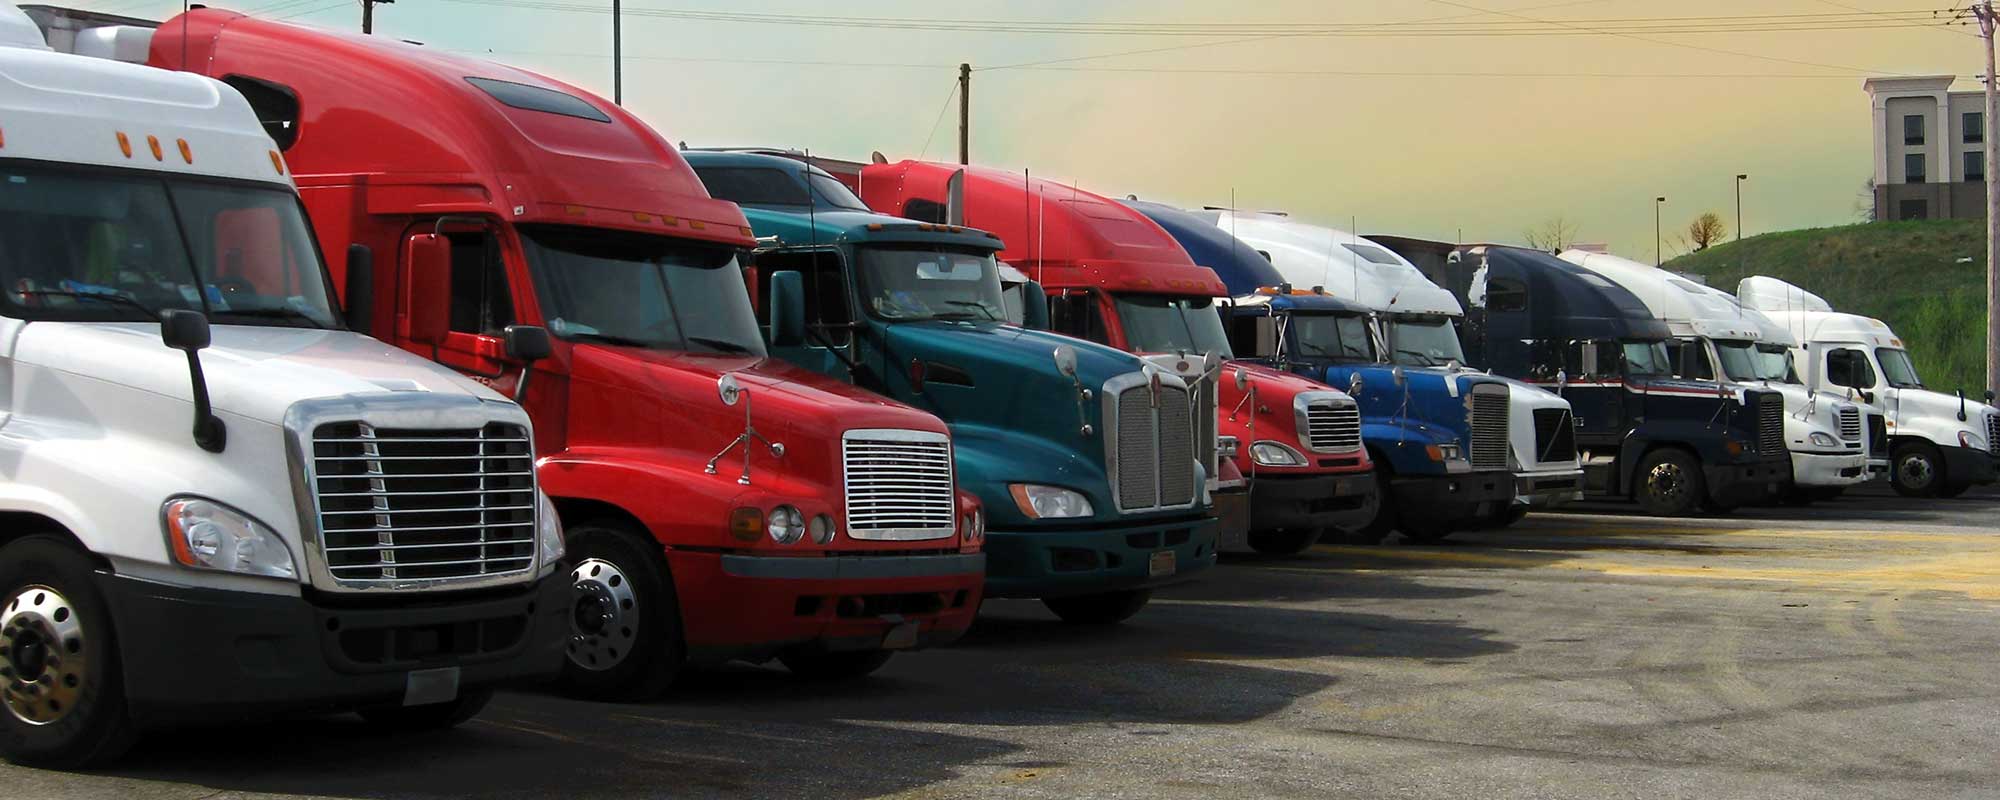 Trucks Lined Up